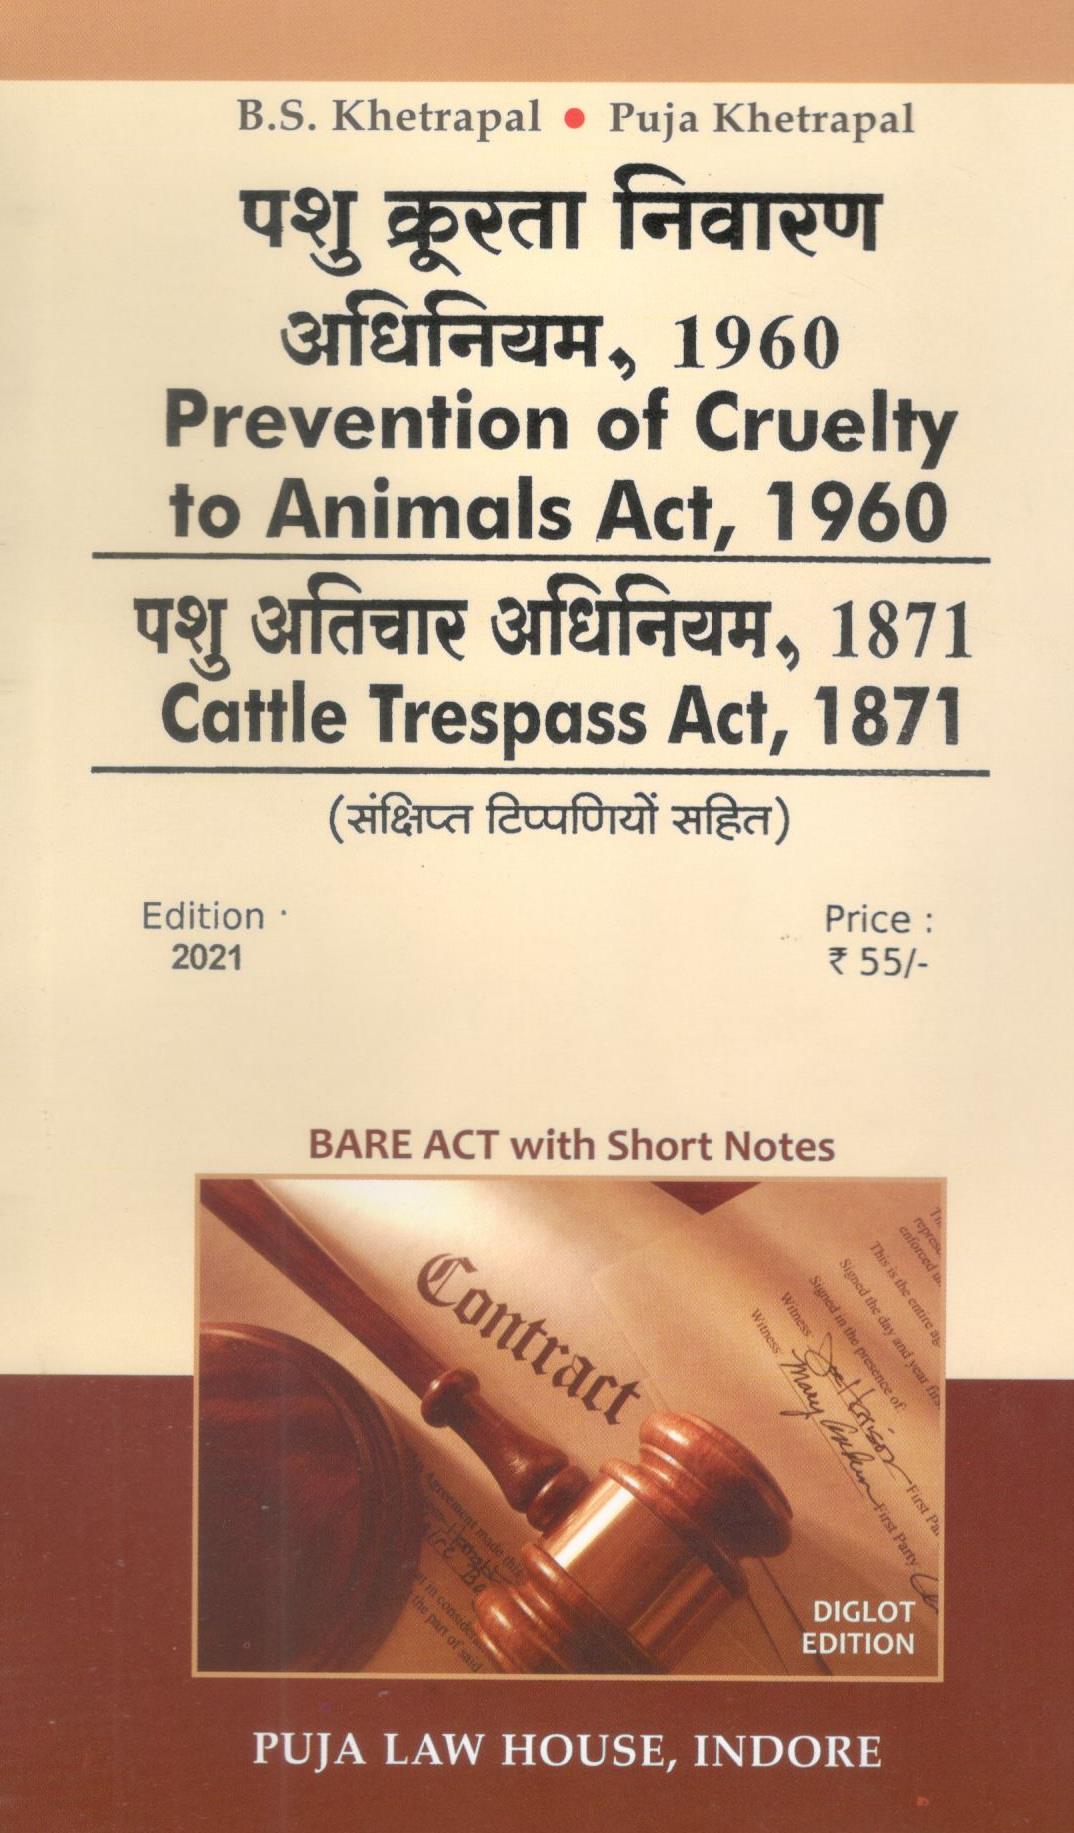 Buy Prevention of Cruelty to Animals Act, 1960 | पशु क्रूरता निवारण  अधिनियम, 1960 | Cattle Trespass Act, 1871 / पशु अतिचार अधिनियम, 1871 by  . Khetrapal - Puja Khetrapal Puja Law House Books In India